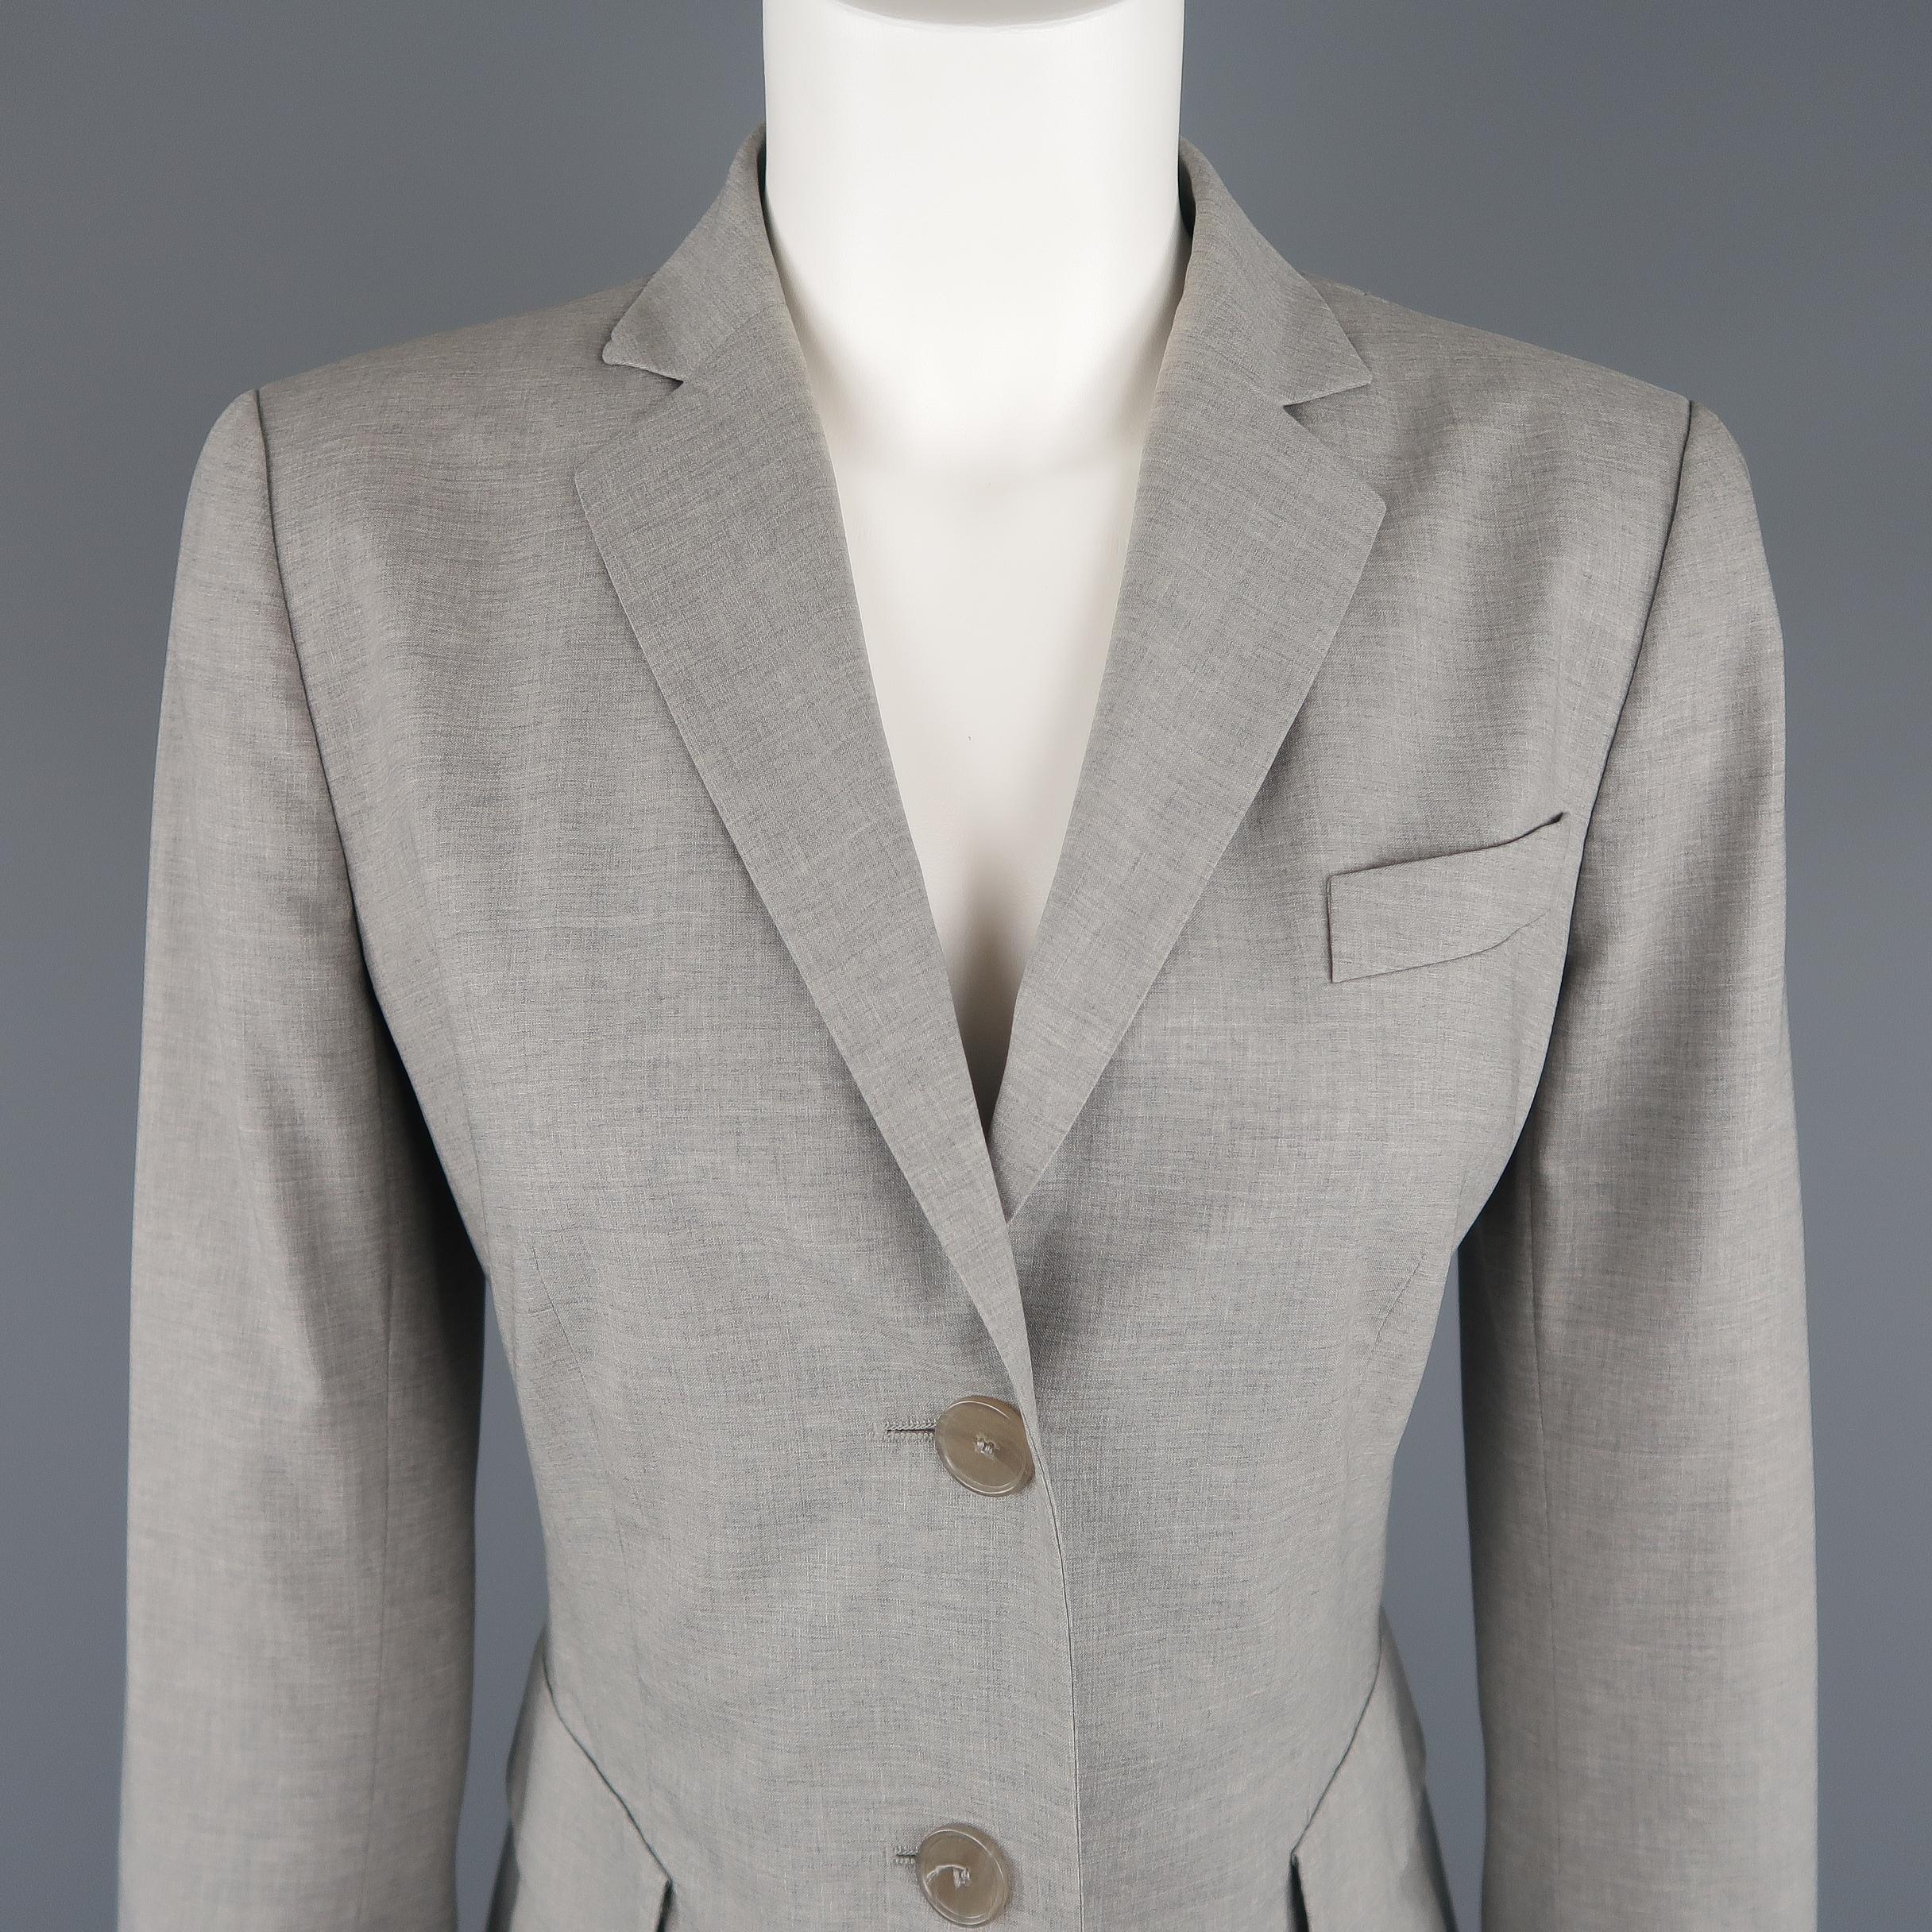 AKRIS long sport coat comes in light weight heather gray acetate blend fabric with a notch lapel, single breasted three button closure, flap pockets, and slit cuffs. Made in Switzerland.
 
Excellent Pre-Owned Condition.
Marked: 6
 
Measurements:
